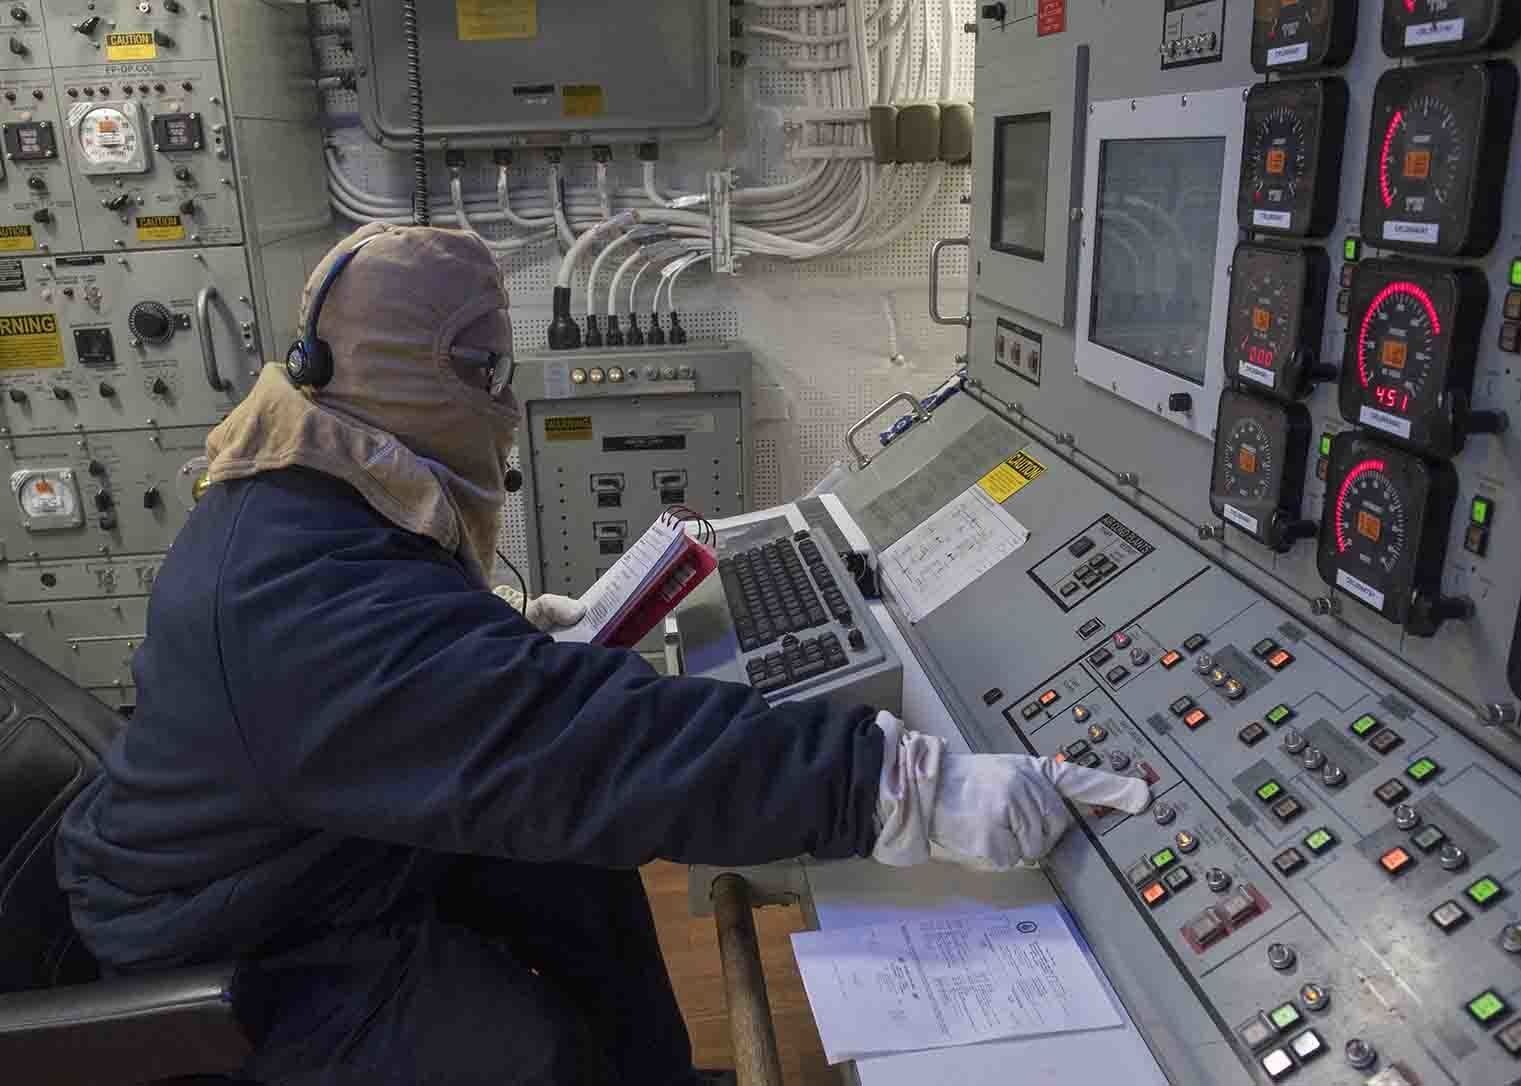 ddg-98 uss forrest sherman arleigh burke class guided missile destroyer aegis us navy electric plant console 47